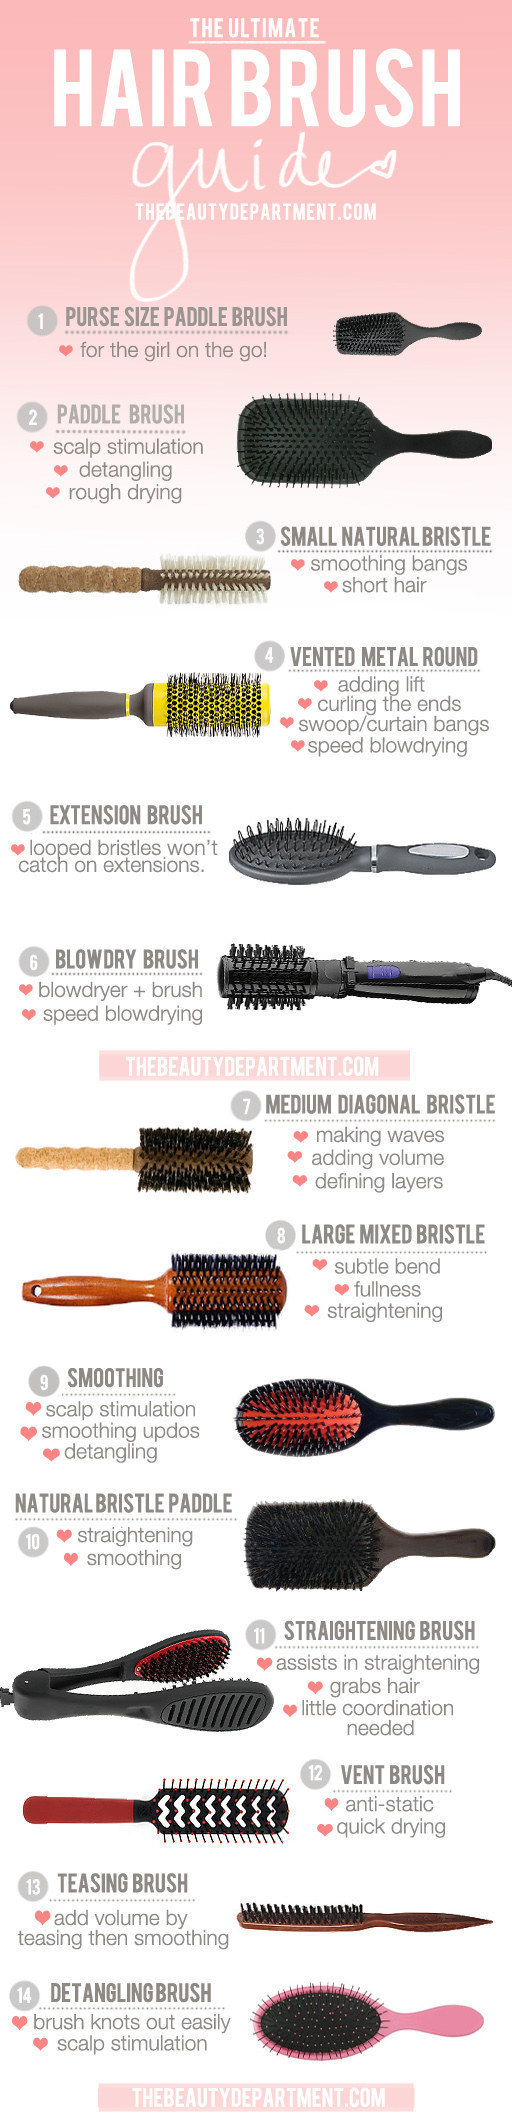 hair brush guide - The Ultimate Hair Brush quided Thebeautydepartment.Com 1 Purse Size Paddle Brush for the girl on the go! 2 Paddle Brush scalp stimulation detangling rough drying 3 Small Natural Bristle smoothing bangs Www short hair 4 Vented Metal Roun